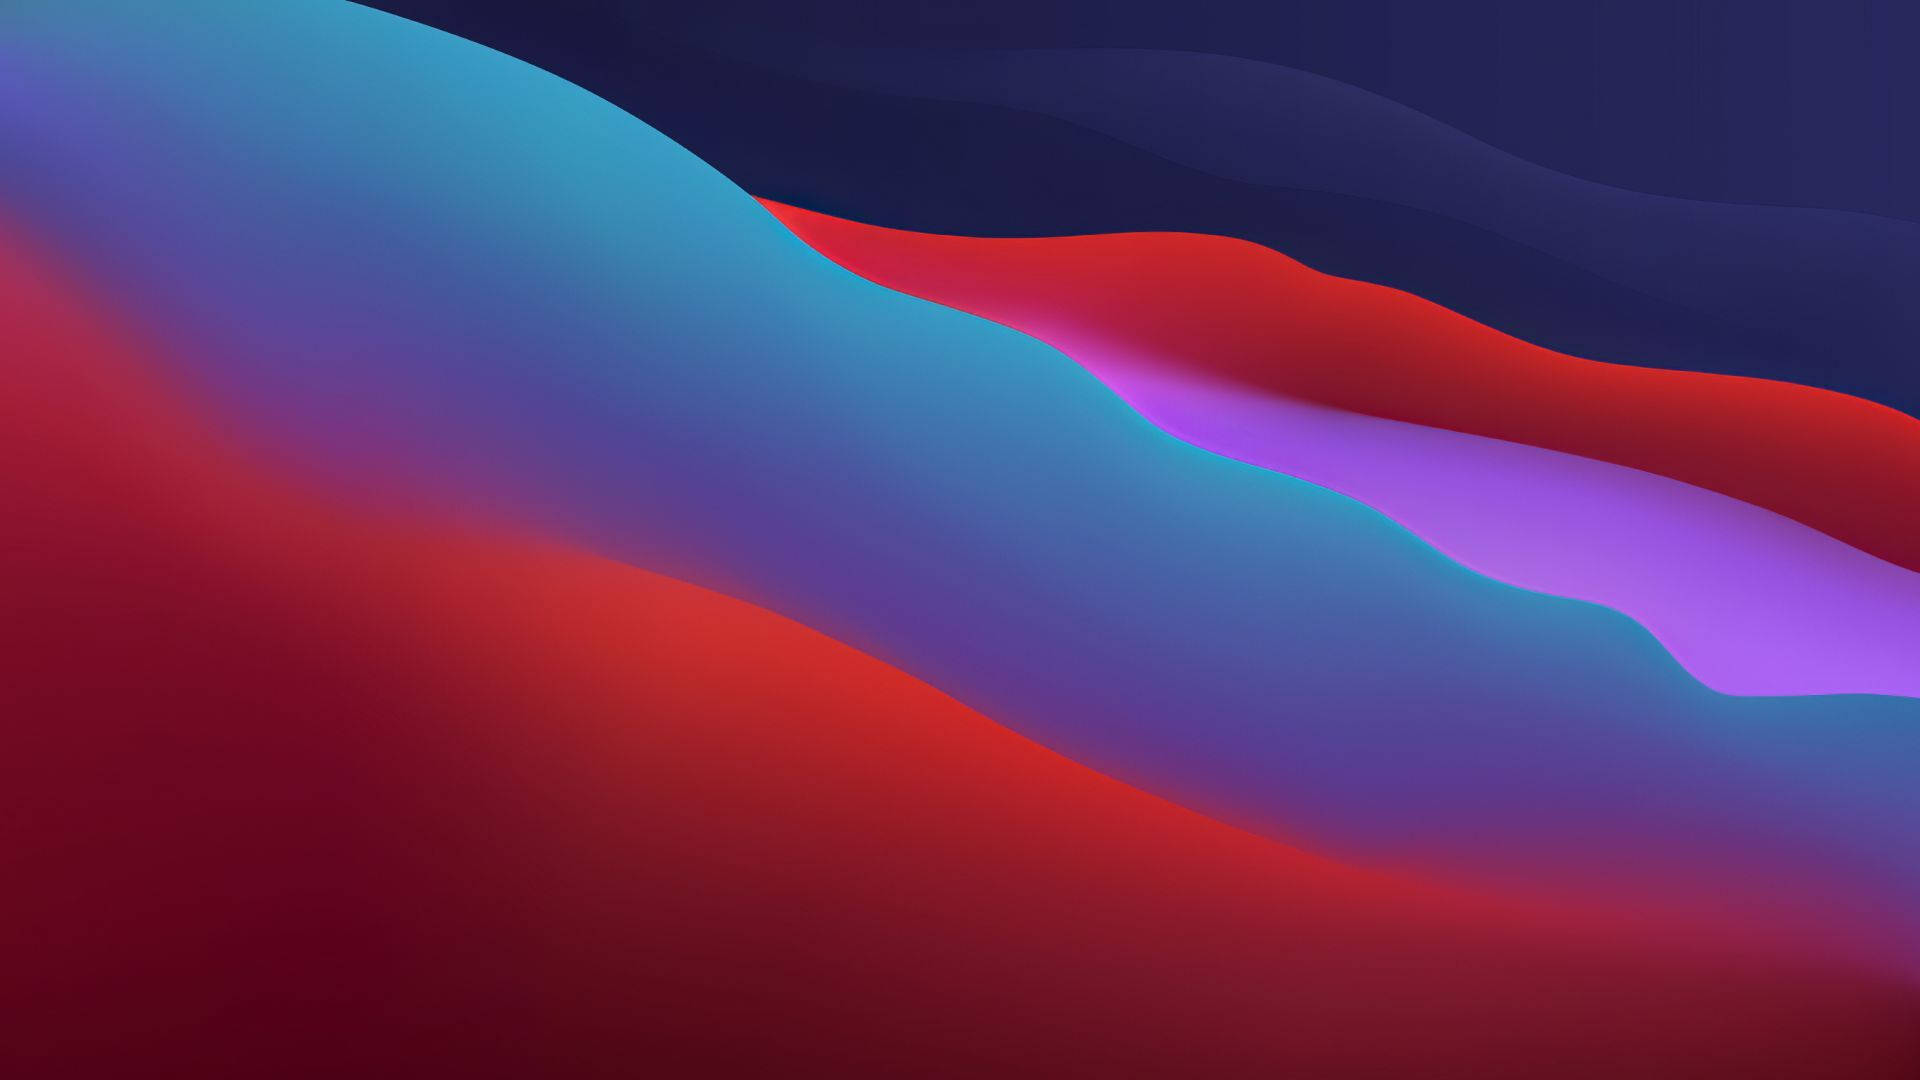 Macos Big Sur Red And Blue Waves